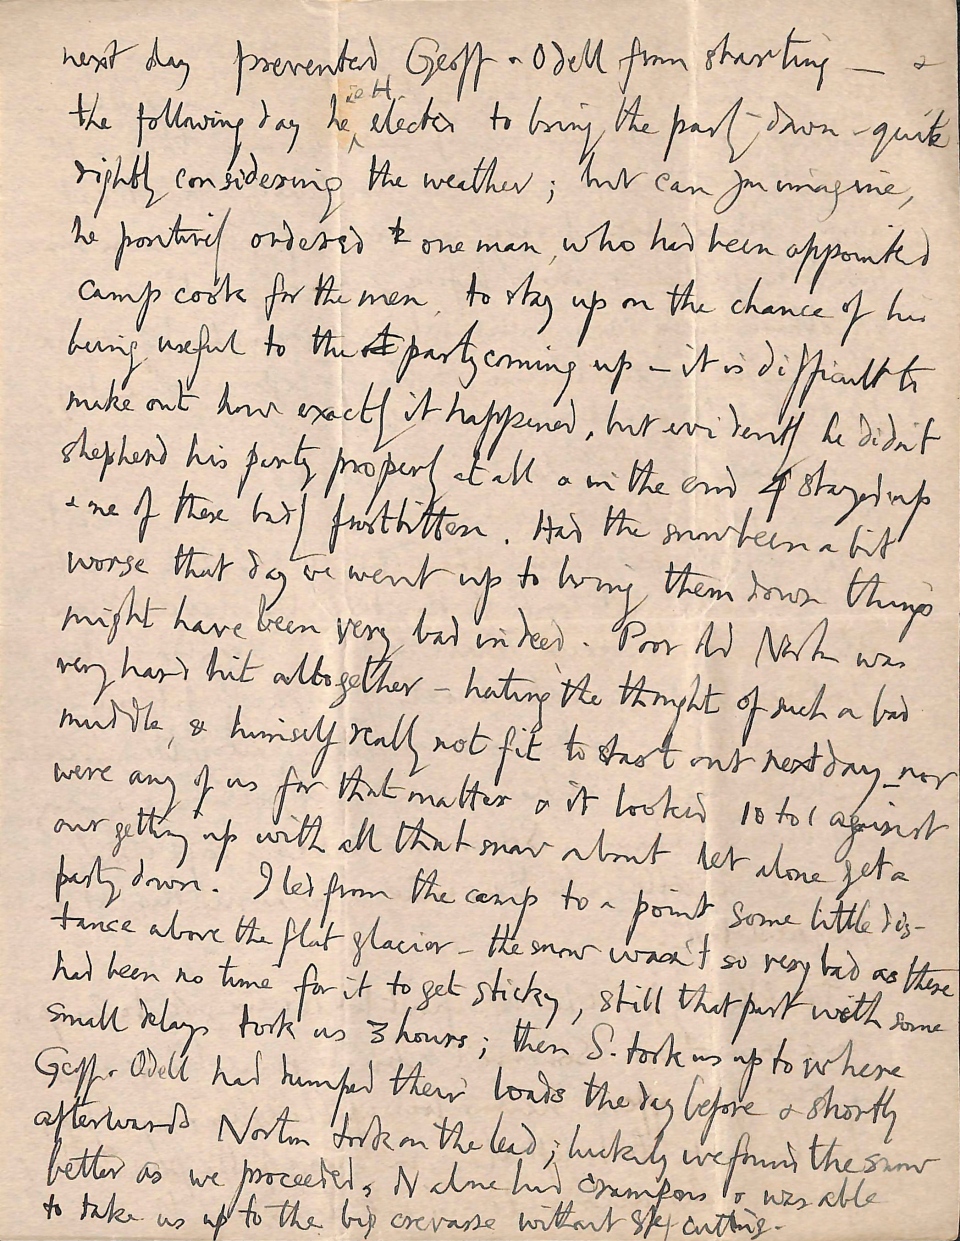 Mountaineer George Mallory's Everest letter